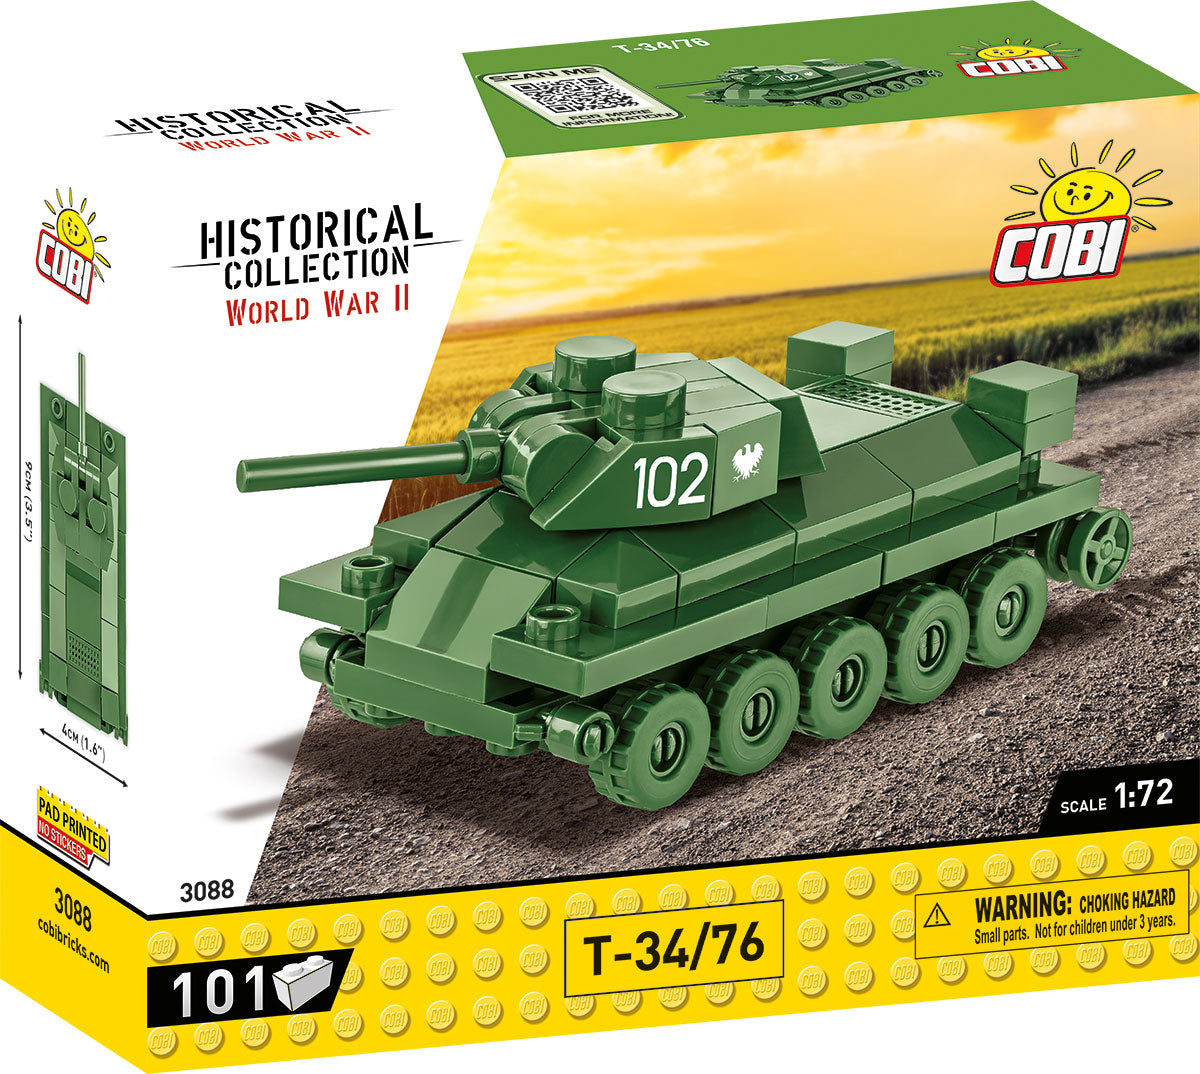 COBI Historical Collection WWII T-34/76 1:72 Scale Tank